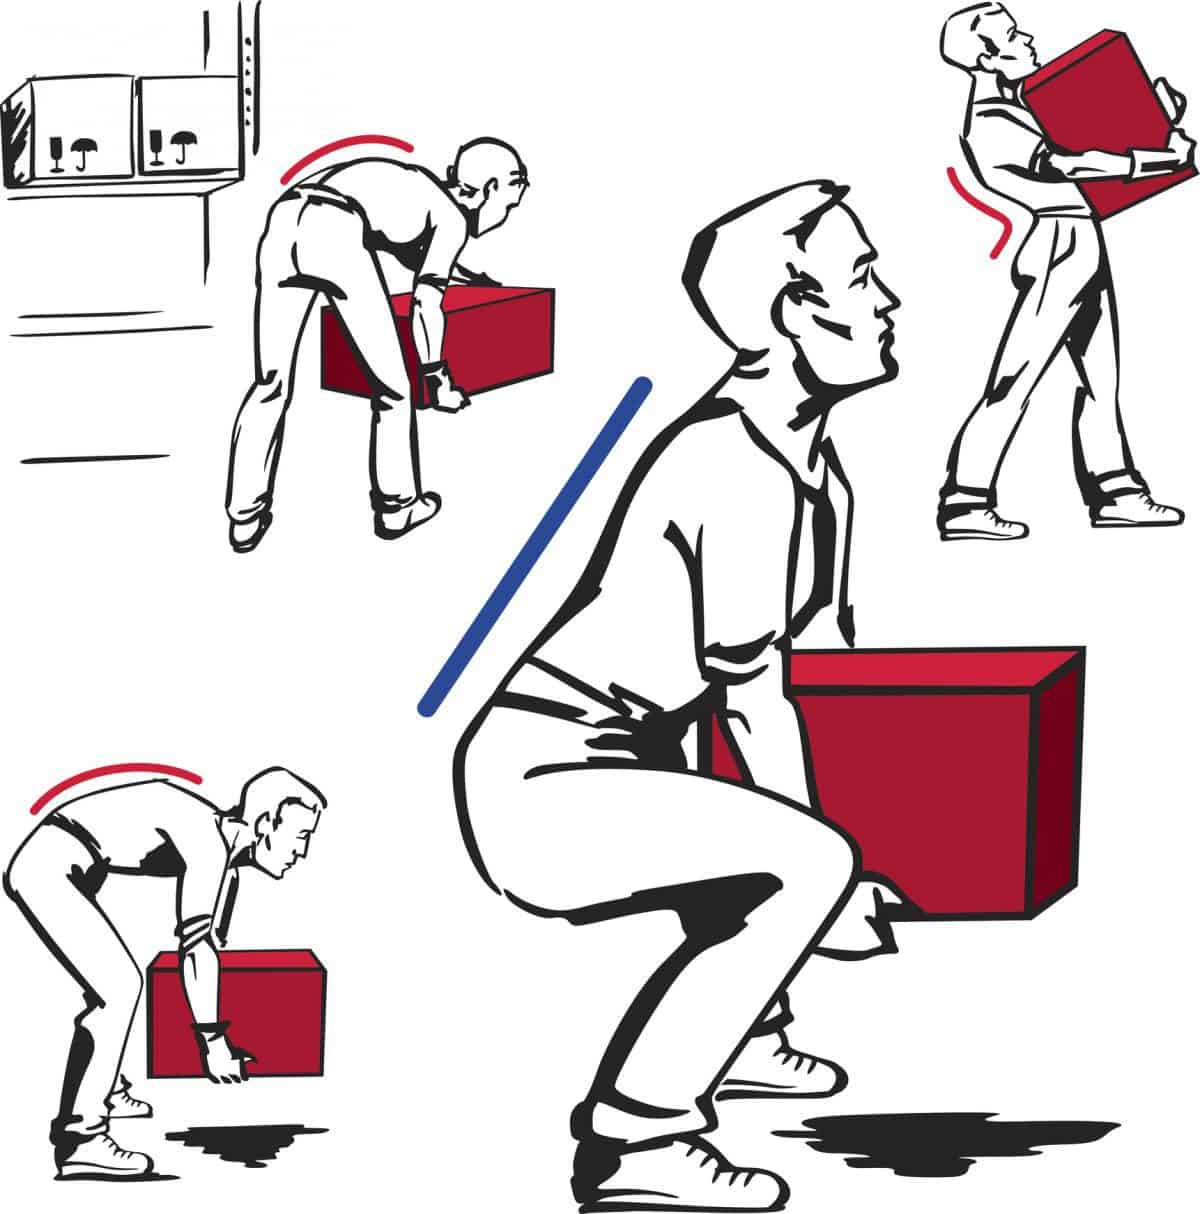 evidence-says-don-t-rely-on-manual-handling-training-as-it-doesn-t-work